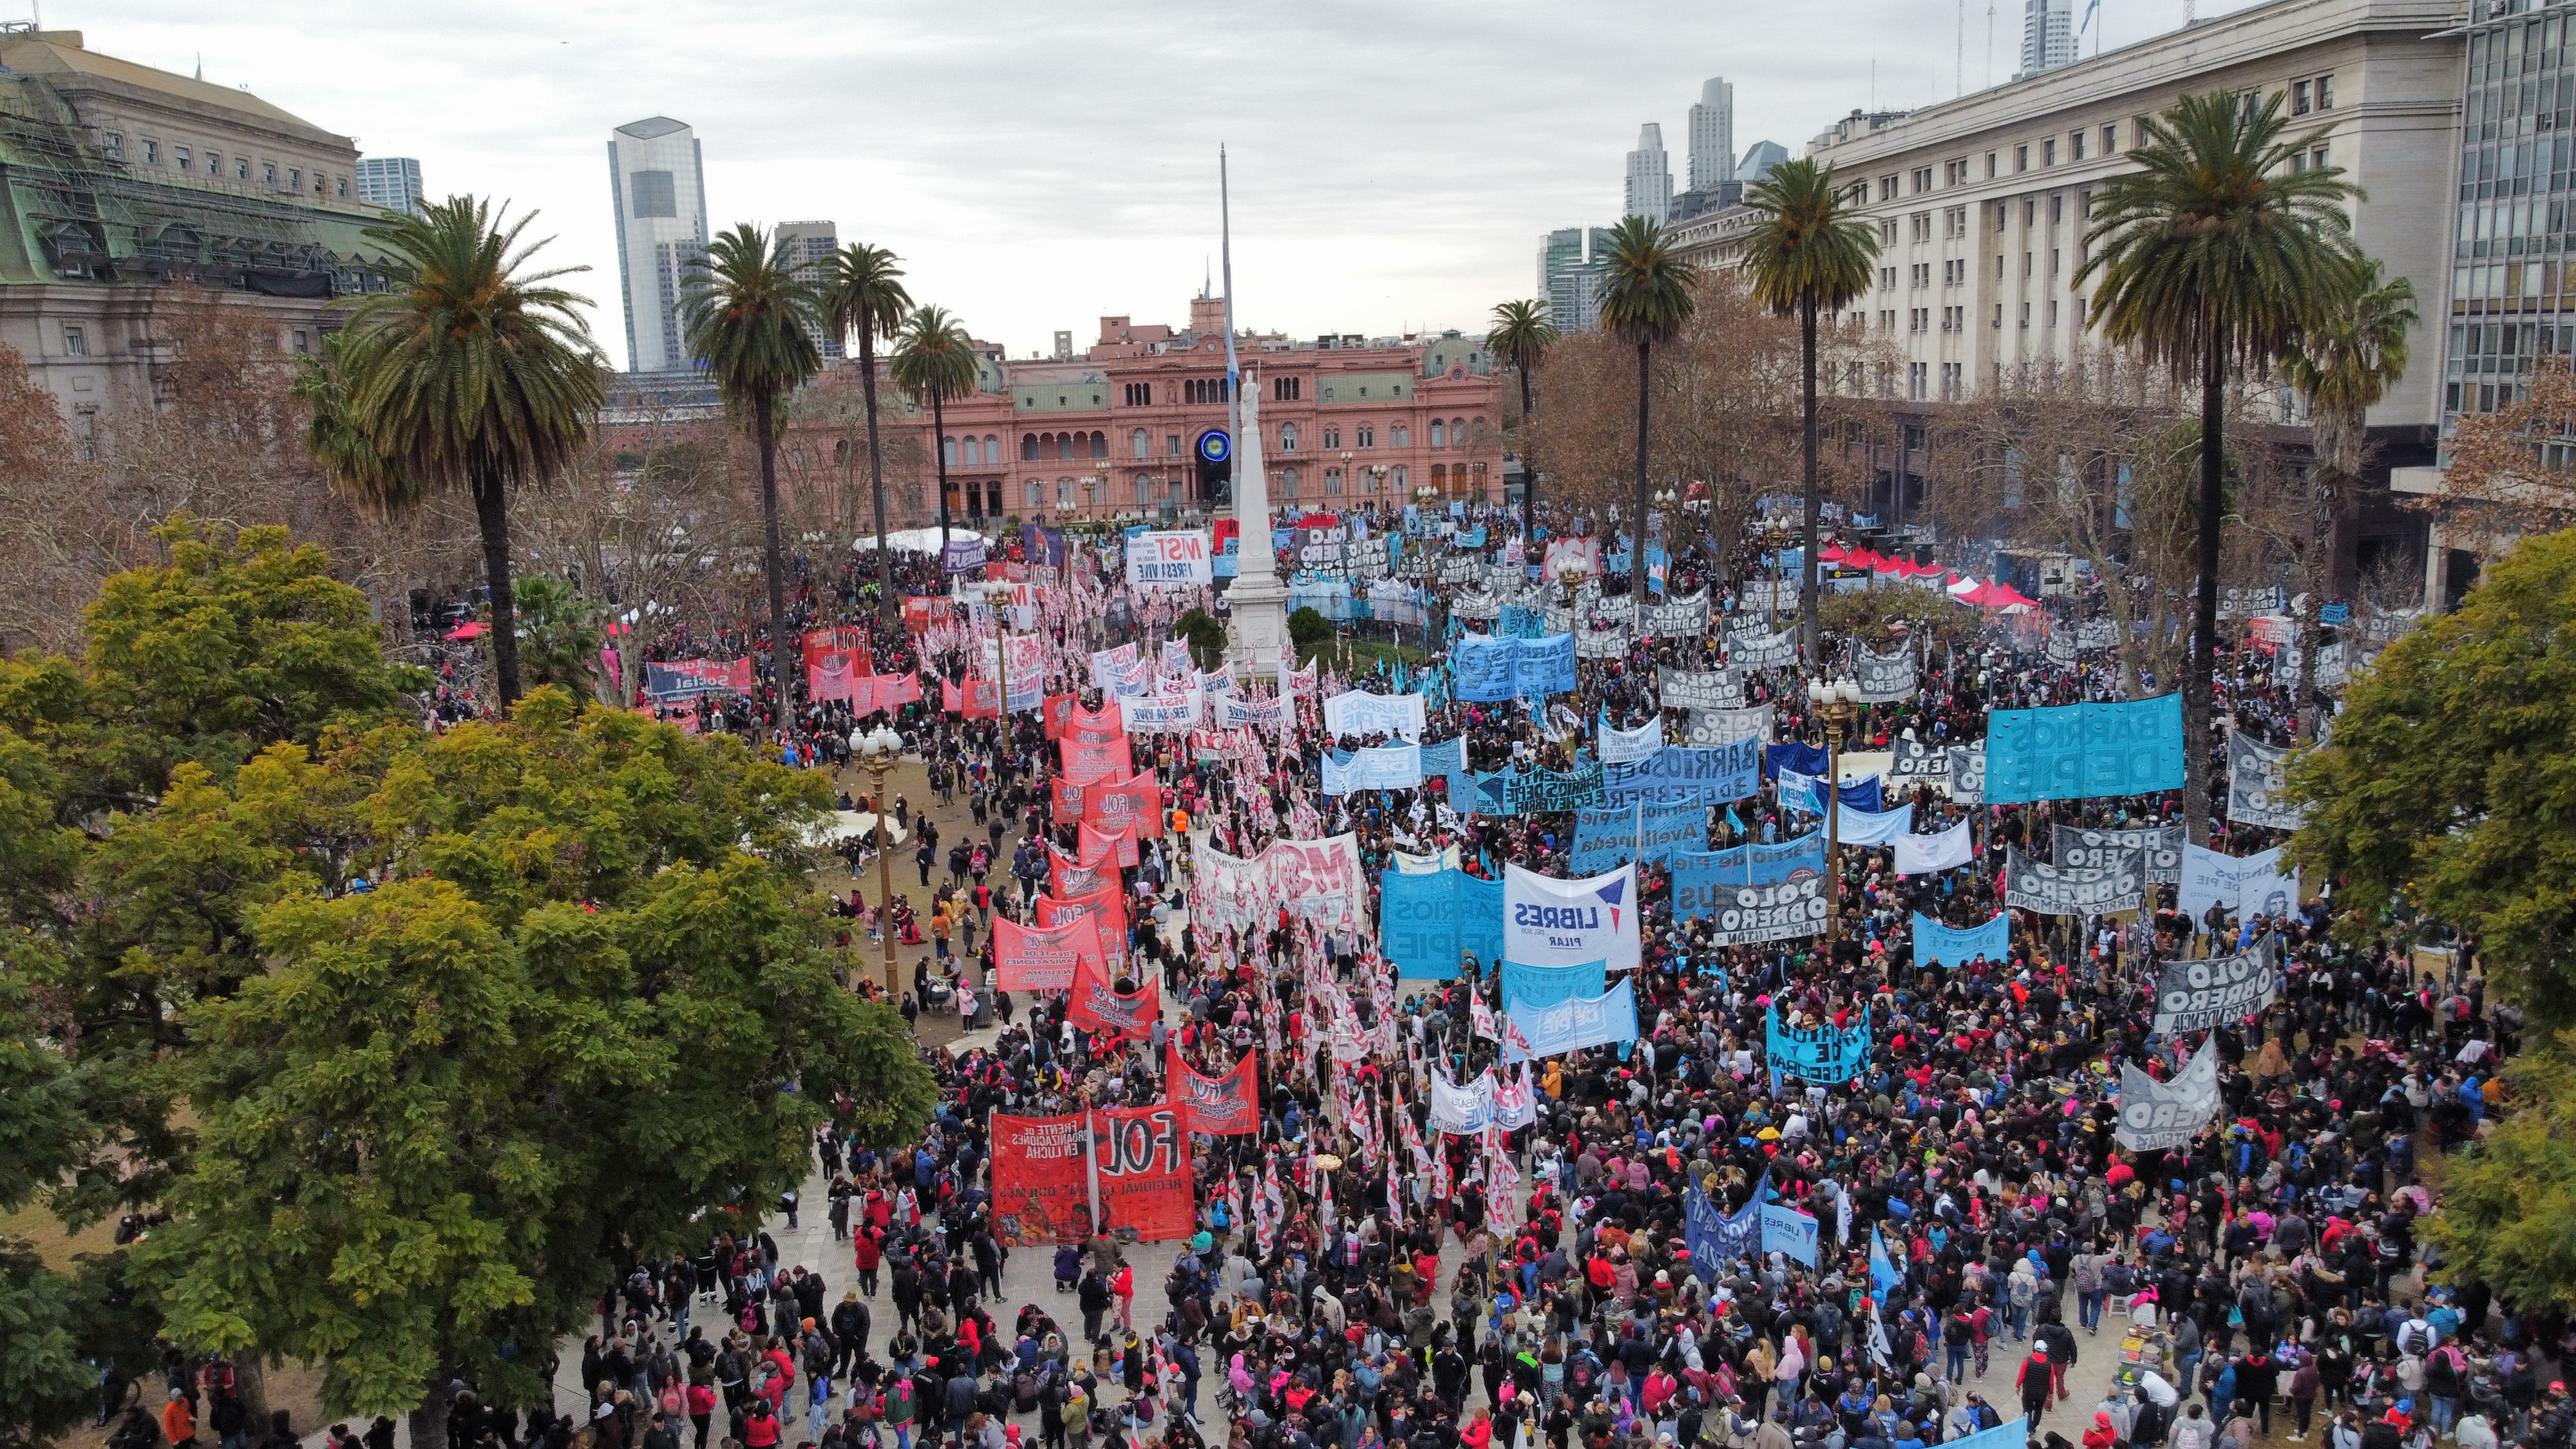 On Thursday the Piquetera Unit marches to Plaza de Mayo once again (Franco Fafasuli)